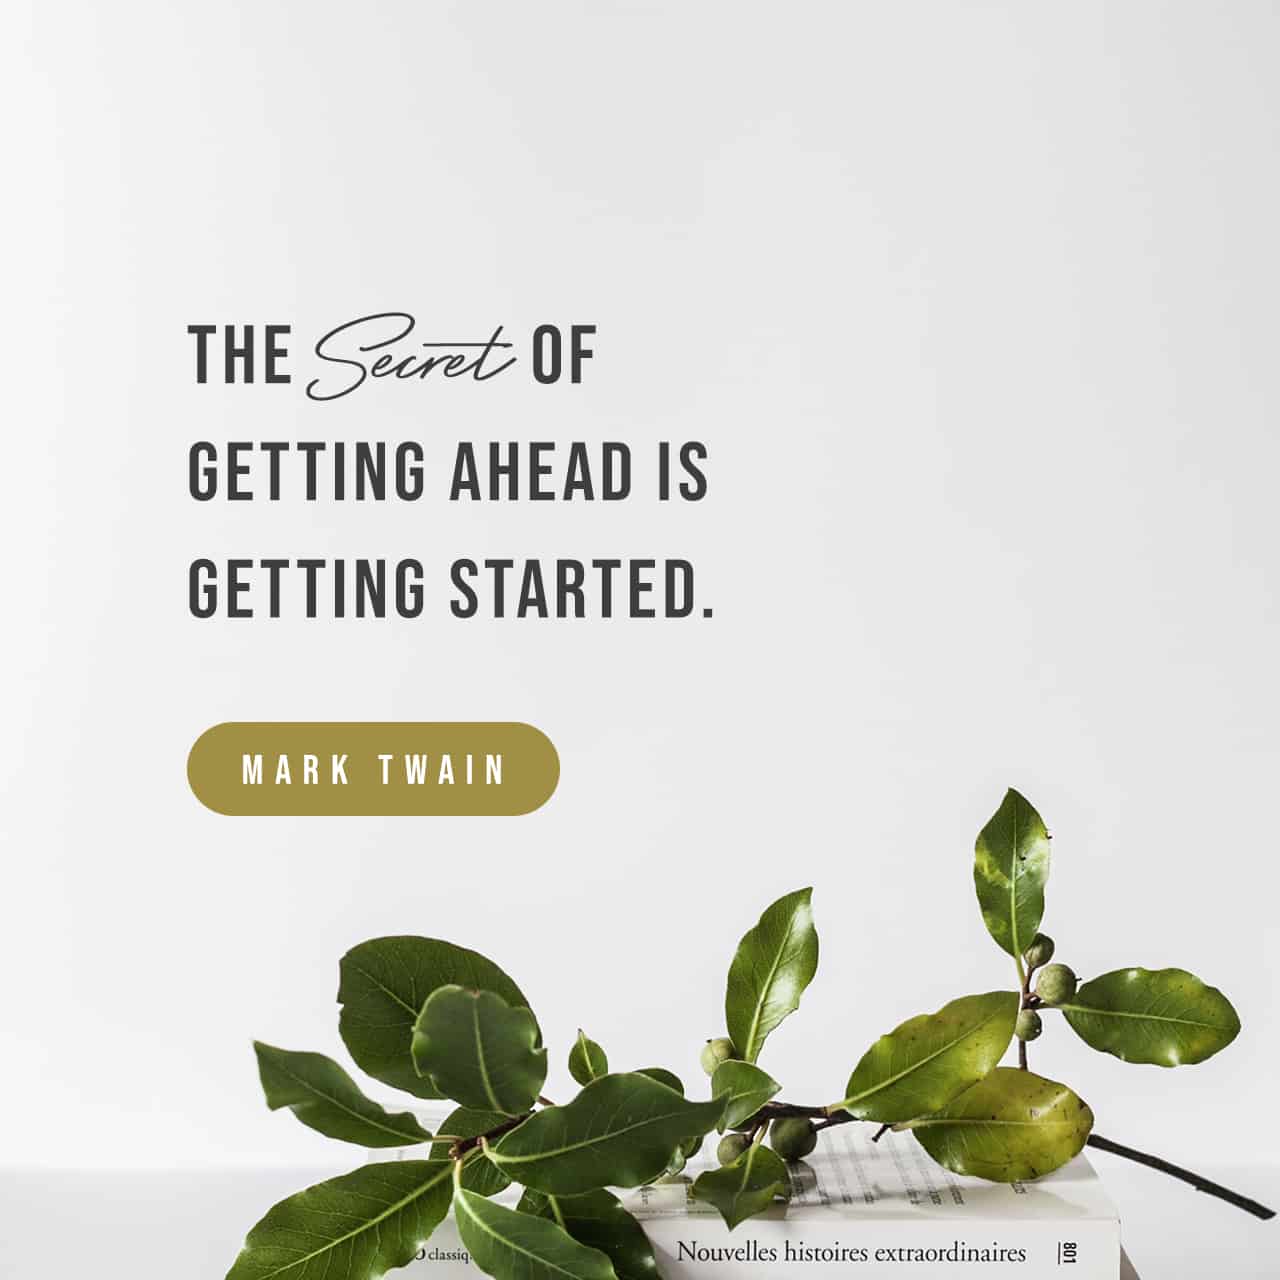 The Secret of Getting Ahead is Getting Started - Mark Twain